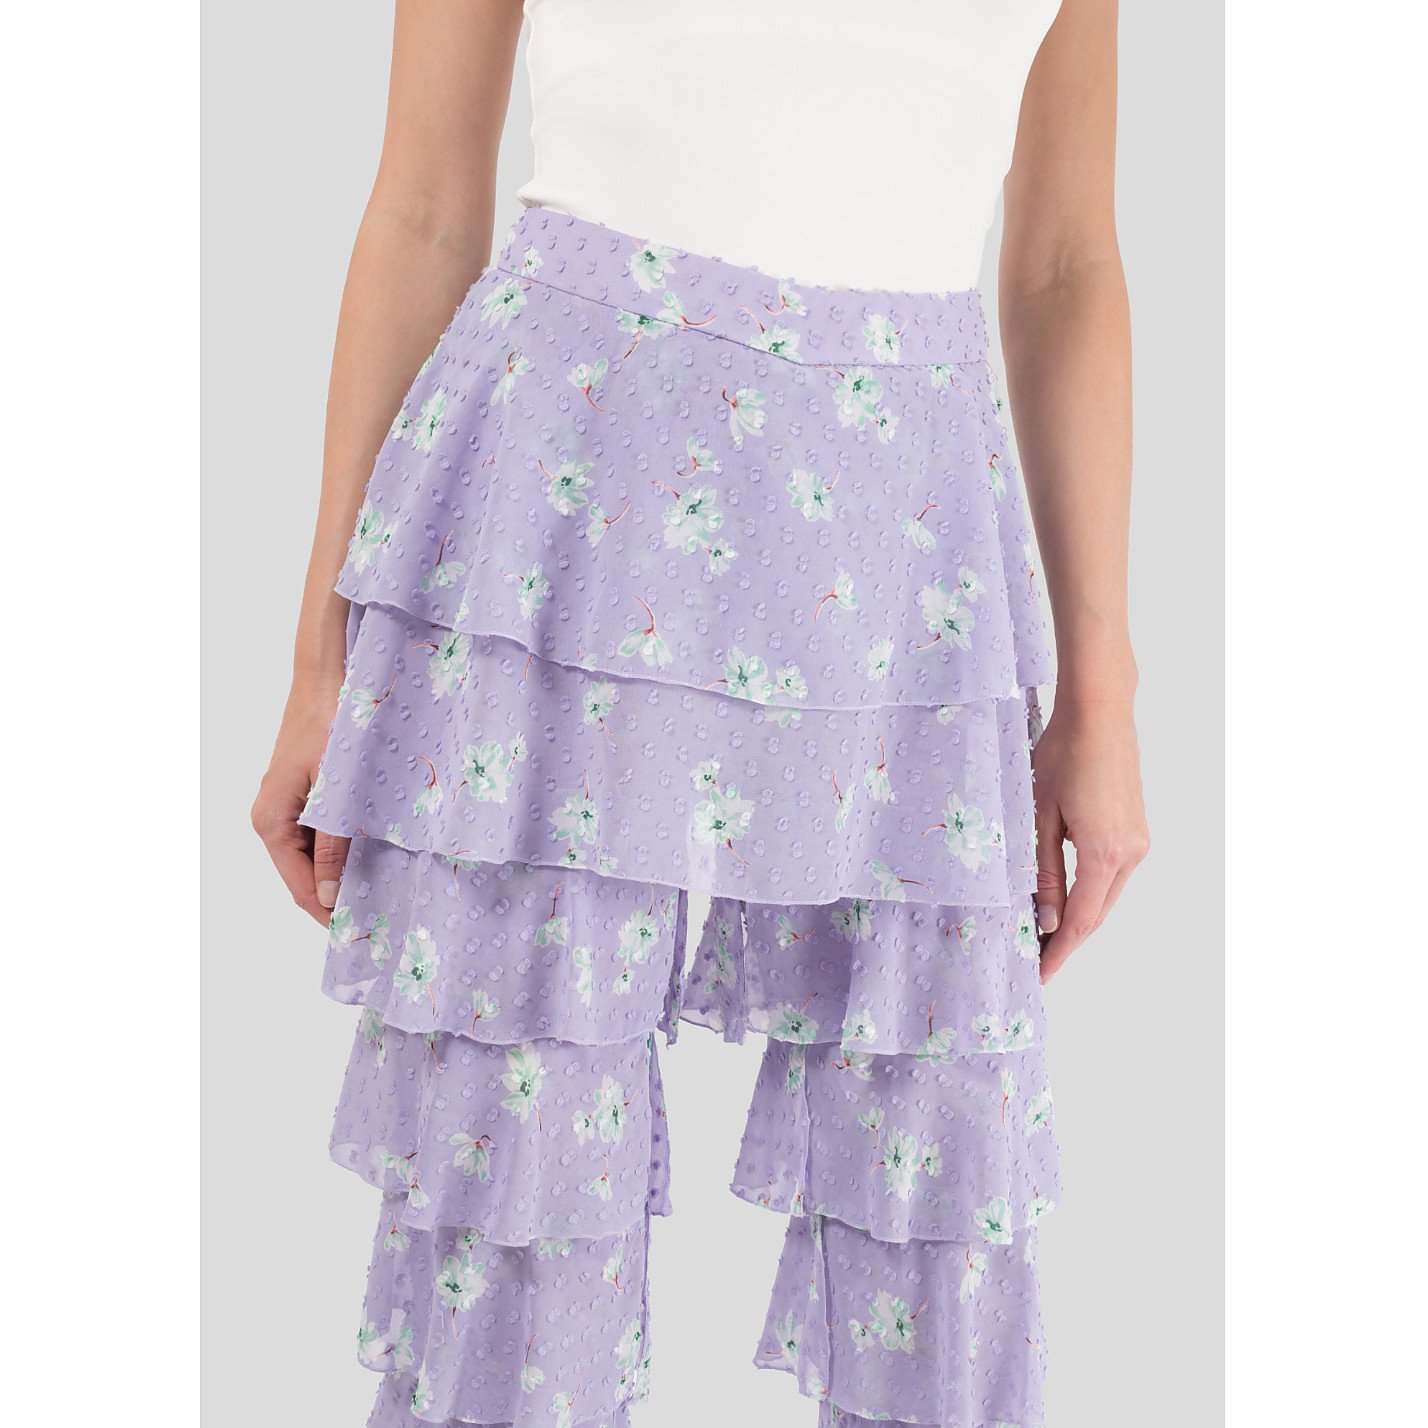 Starsica Printed Frill Trousers